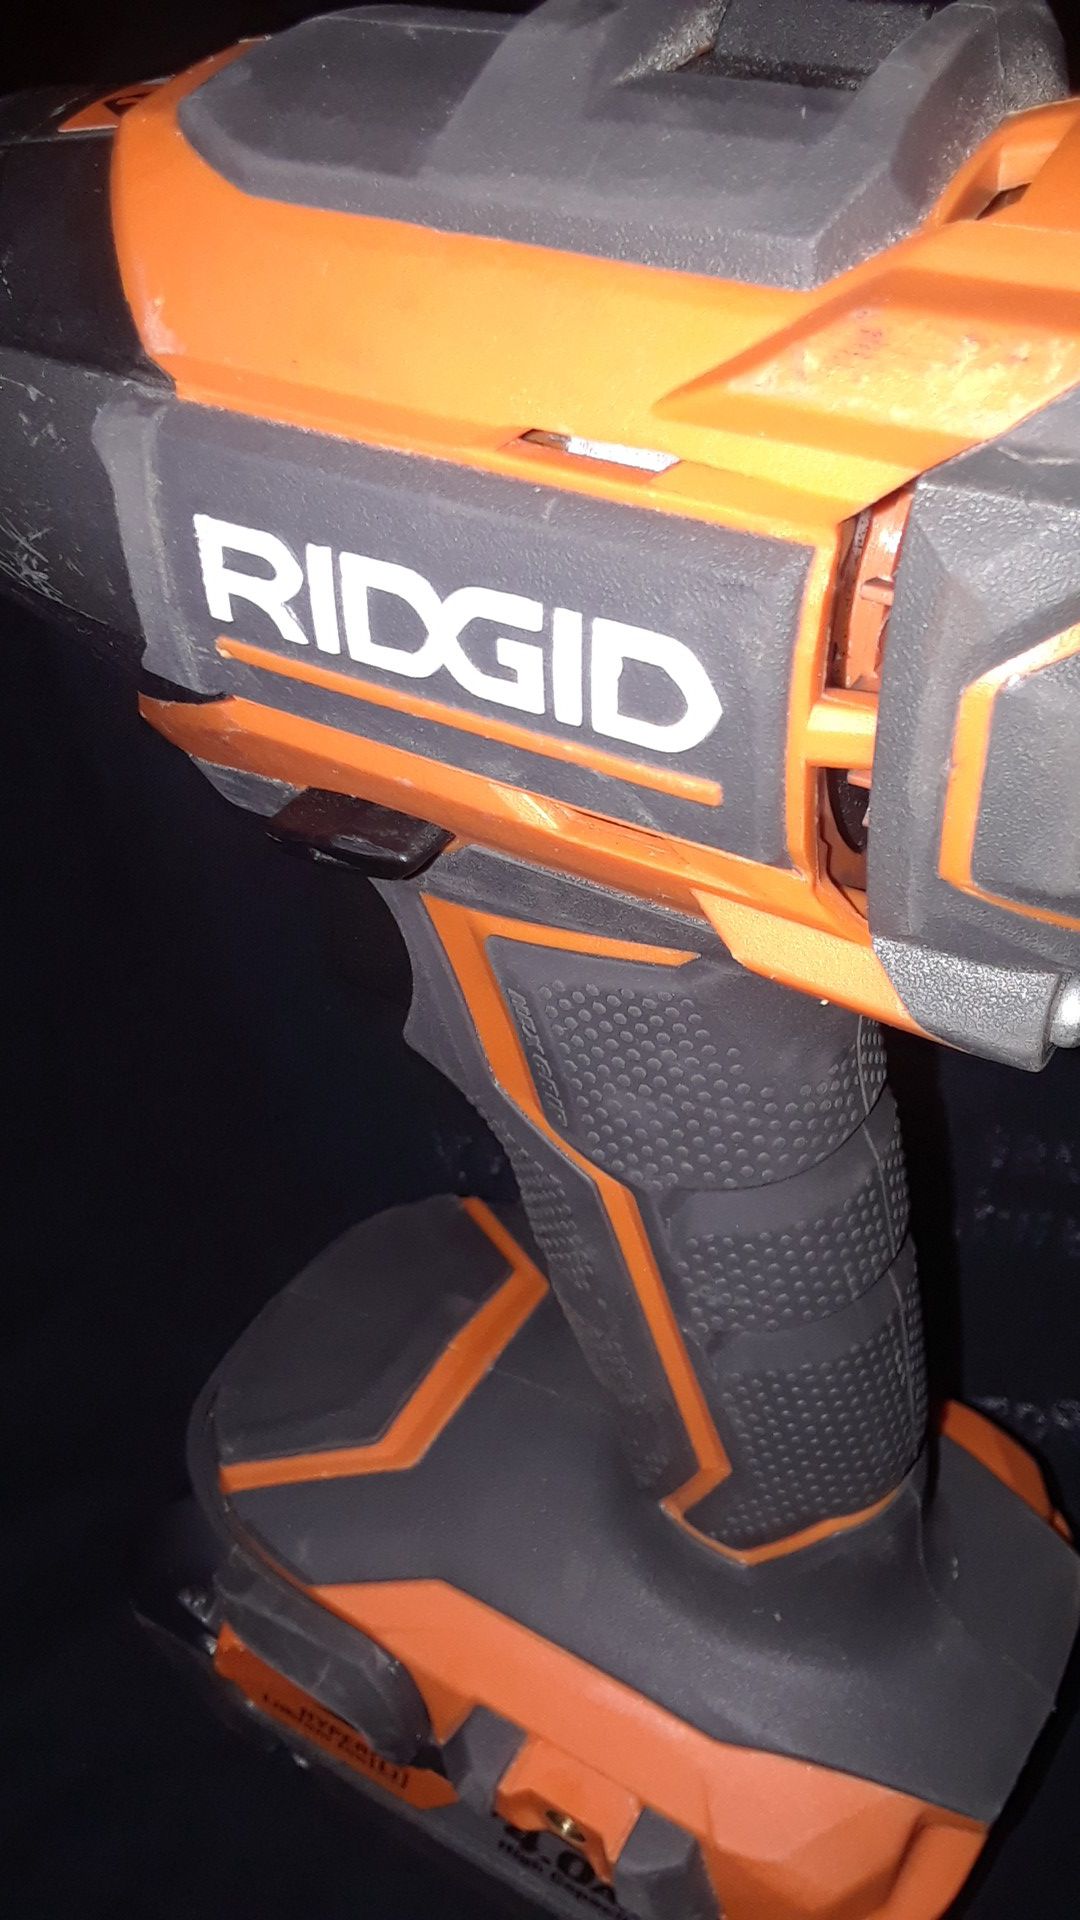 RIDGID 18V GEN5X Driver! With Battery only!